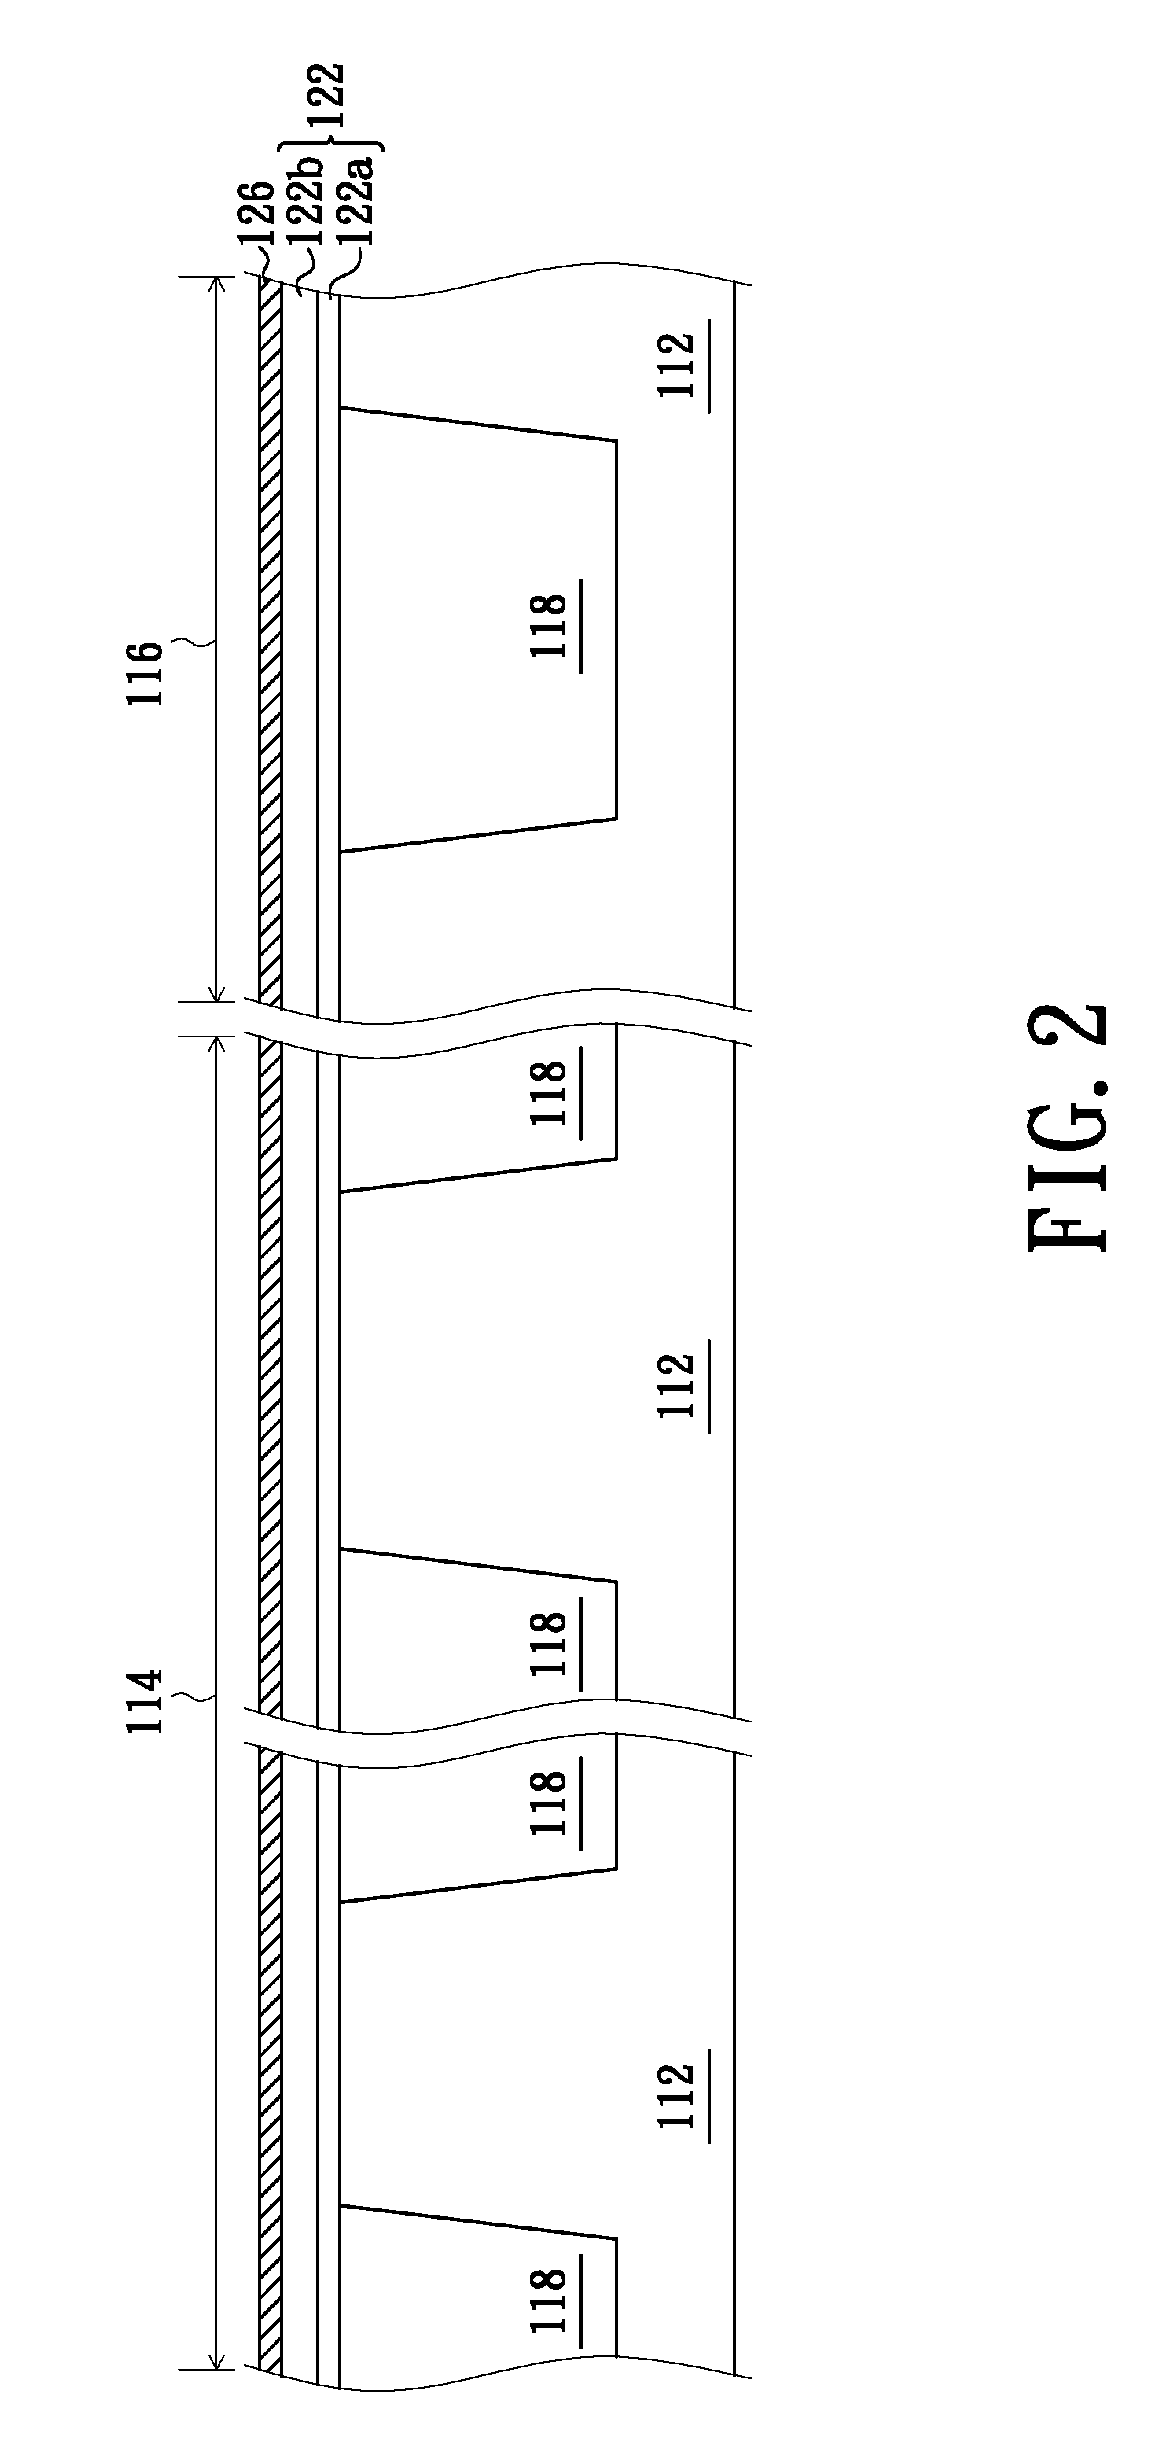 Method of forming an electrical fuse and a metal gate transistor and the related electrical fuse